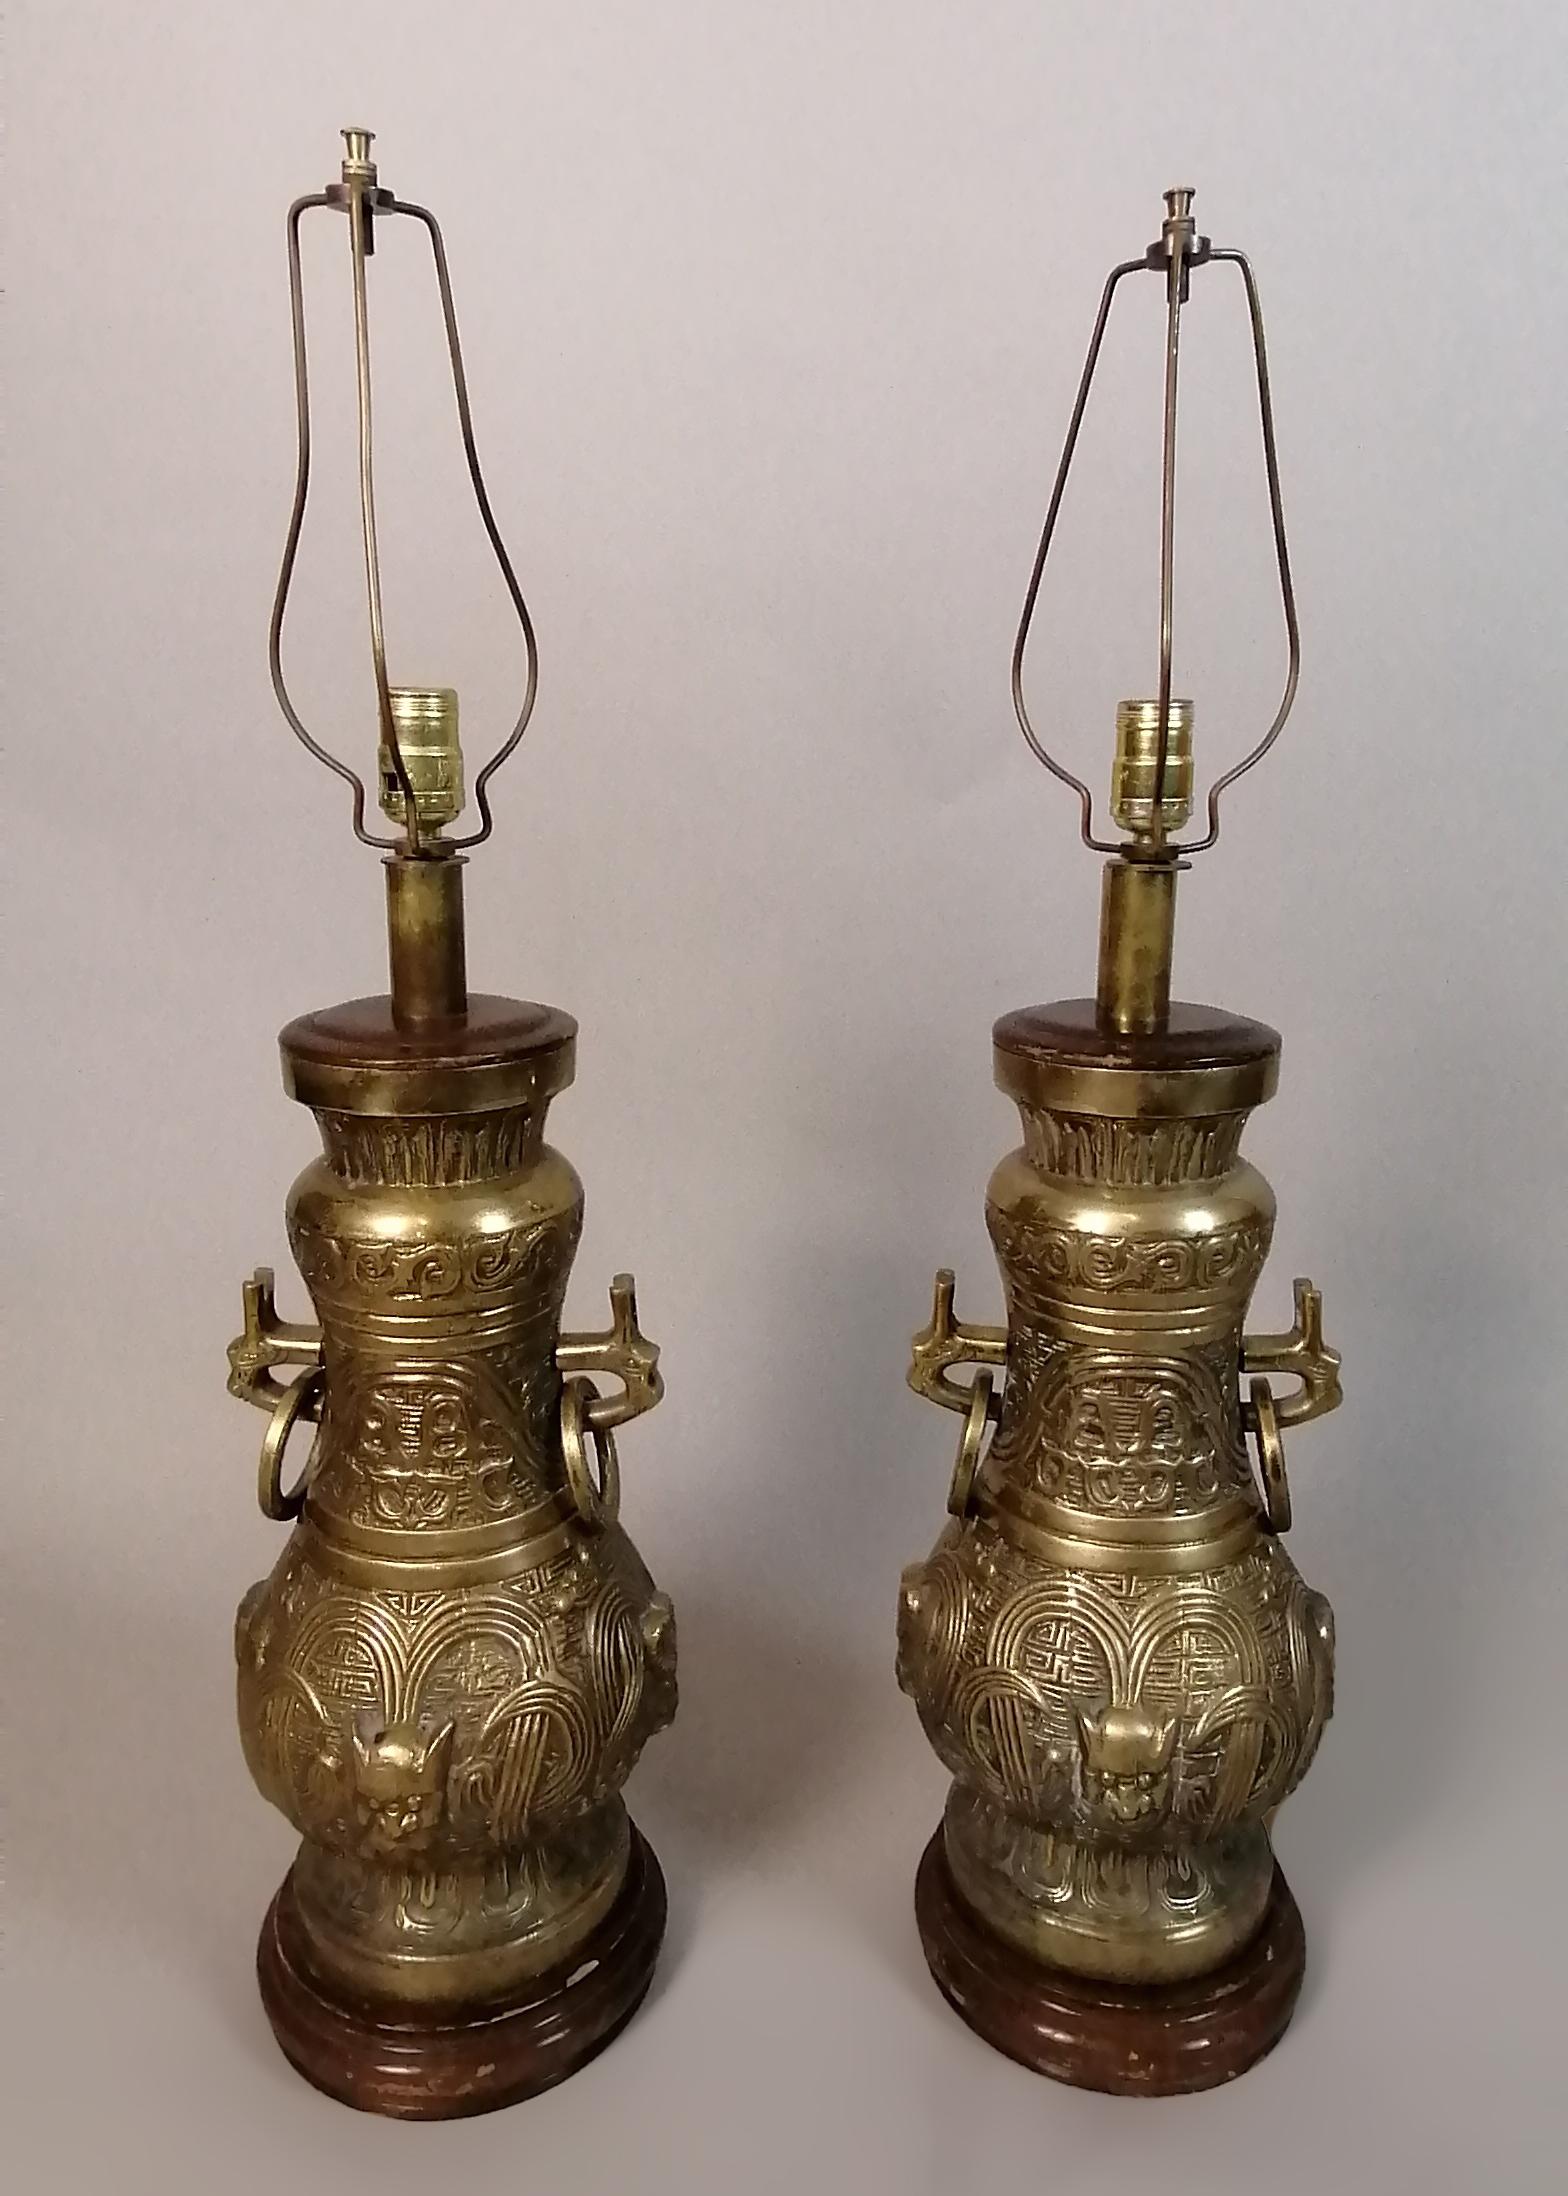 Pair of 1960's Mexican bronze table lamps by Pepe Mendoza. The chinoise design shows an Oriental jar with geometric and fantastic elements. Set over wood bases. No apparent marks.